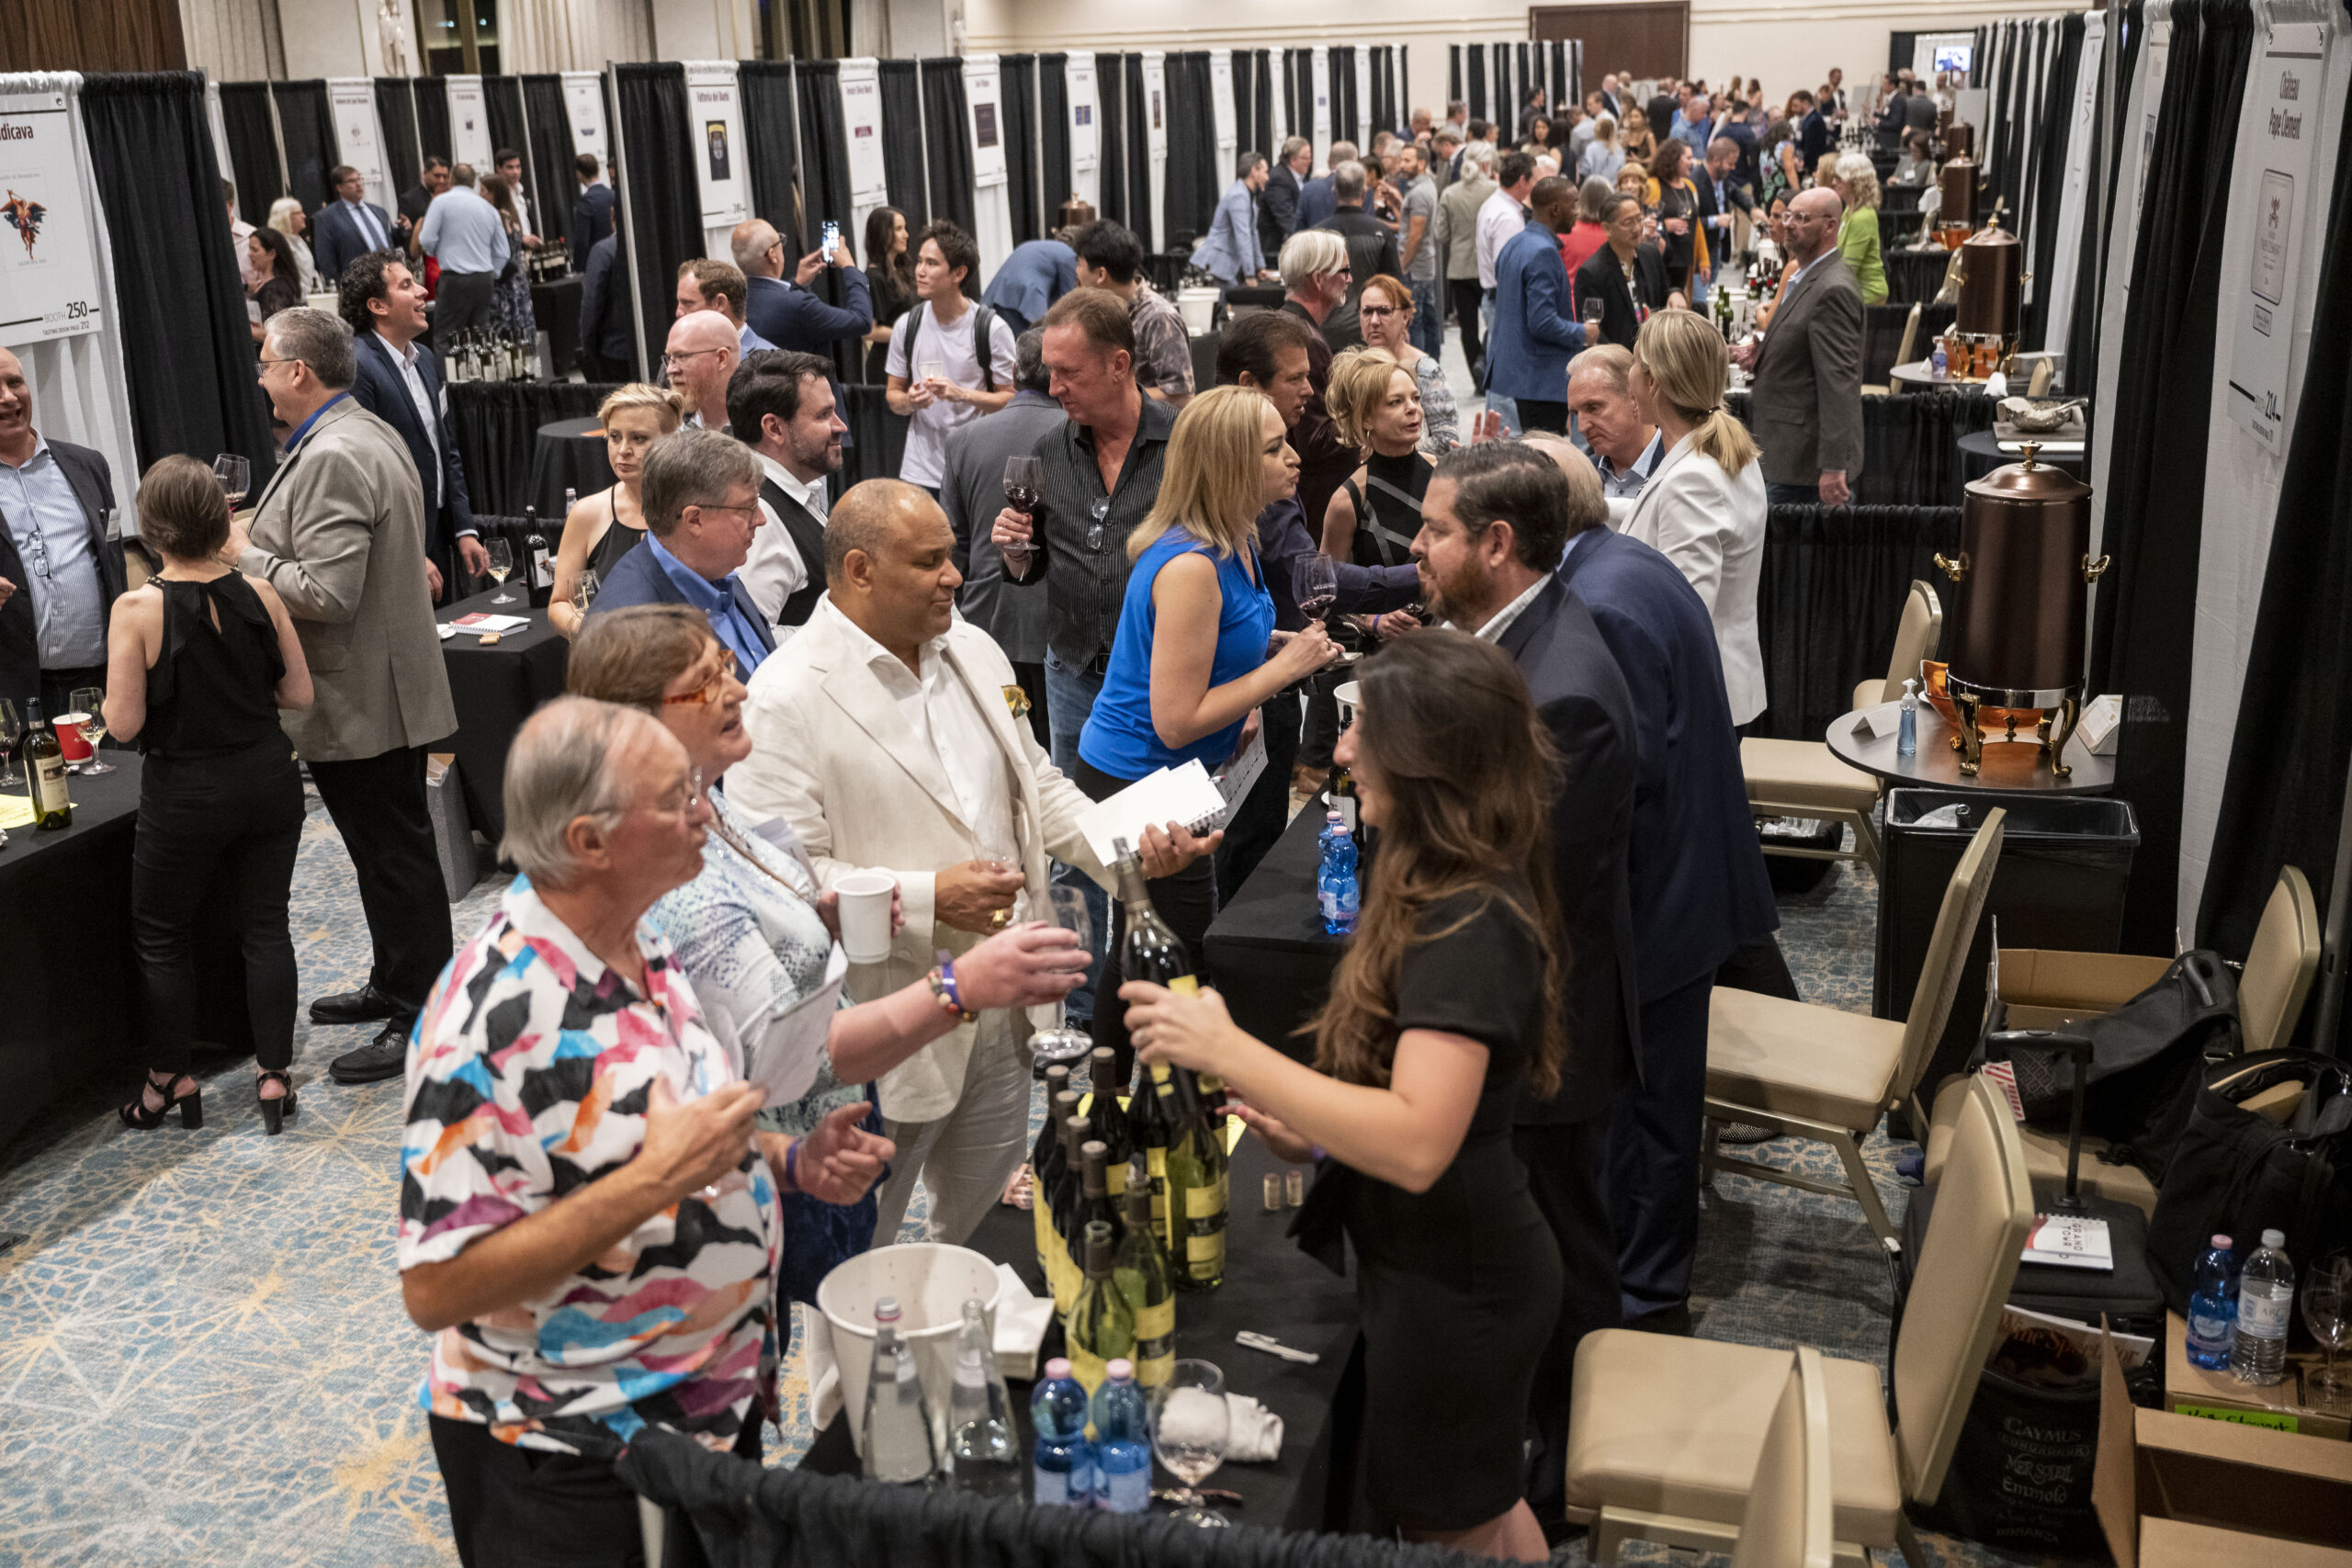 Oenophiles to Savor Over 200 Top-Rated Wines at Wine Spectator’s Grand Tour 2023